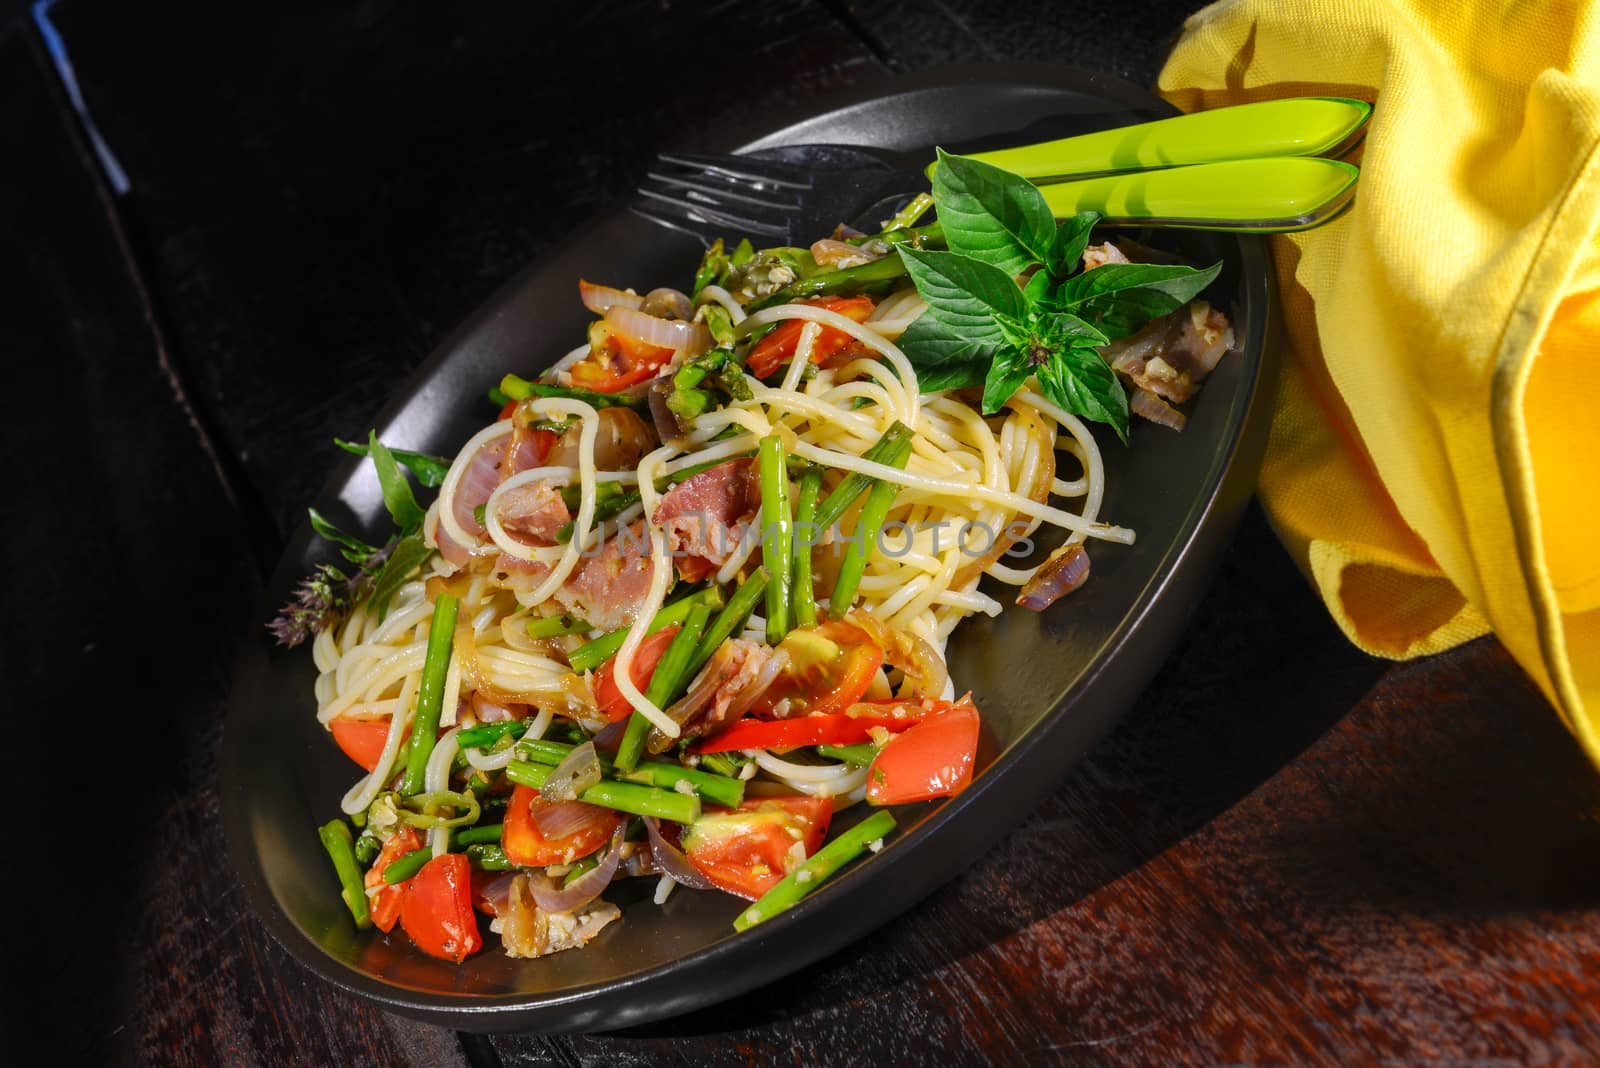 Spaghetti with asparagus tomatoes bacon and herbs on wood table in a black plate